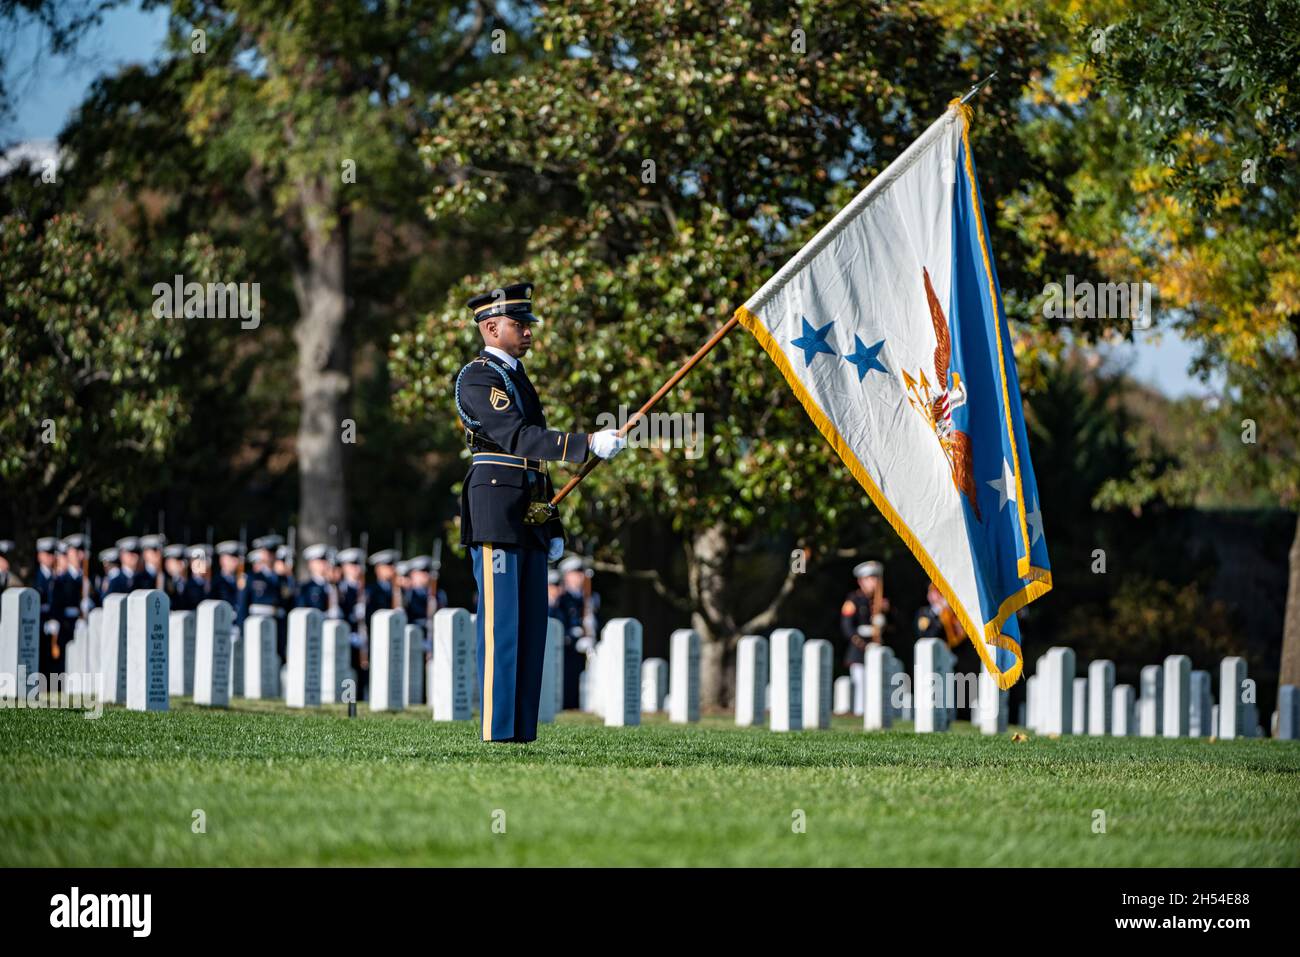 Arlington, United States. 05th Nov, 2021. A U.S. Army Old Guard color bearer carries the Chairman of the Joint Chiefs flag in honor of former Chairman of the Joint Chiefs and Secretary of State Gen. Colin Powell during the full honors funeral at Arlington National Cemetery, November 5, 2021 in Arlington, Virginia. Credit: Elizabeth Fraser/DOD Photo/Alamy Live News Stock Photo